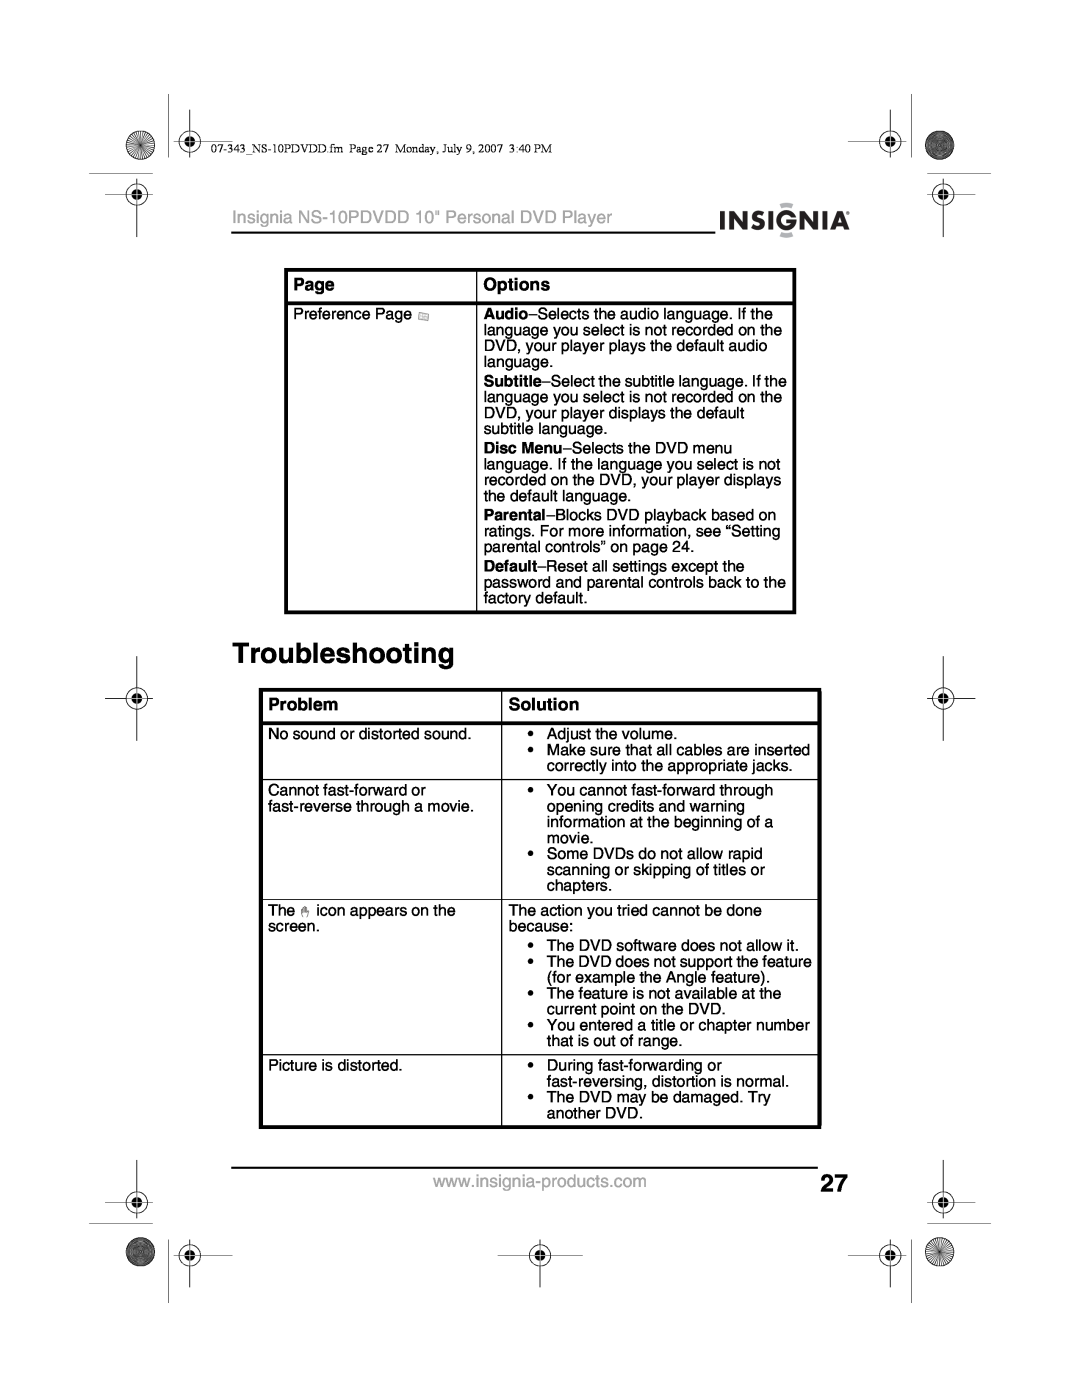 Insignia manual Troubleshooting, Problem, Solution, Insignia NS-10PDVDD 10 Personal DVD Player, Page, Options 